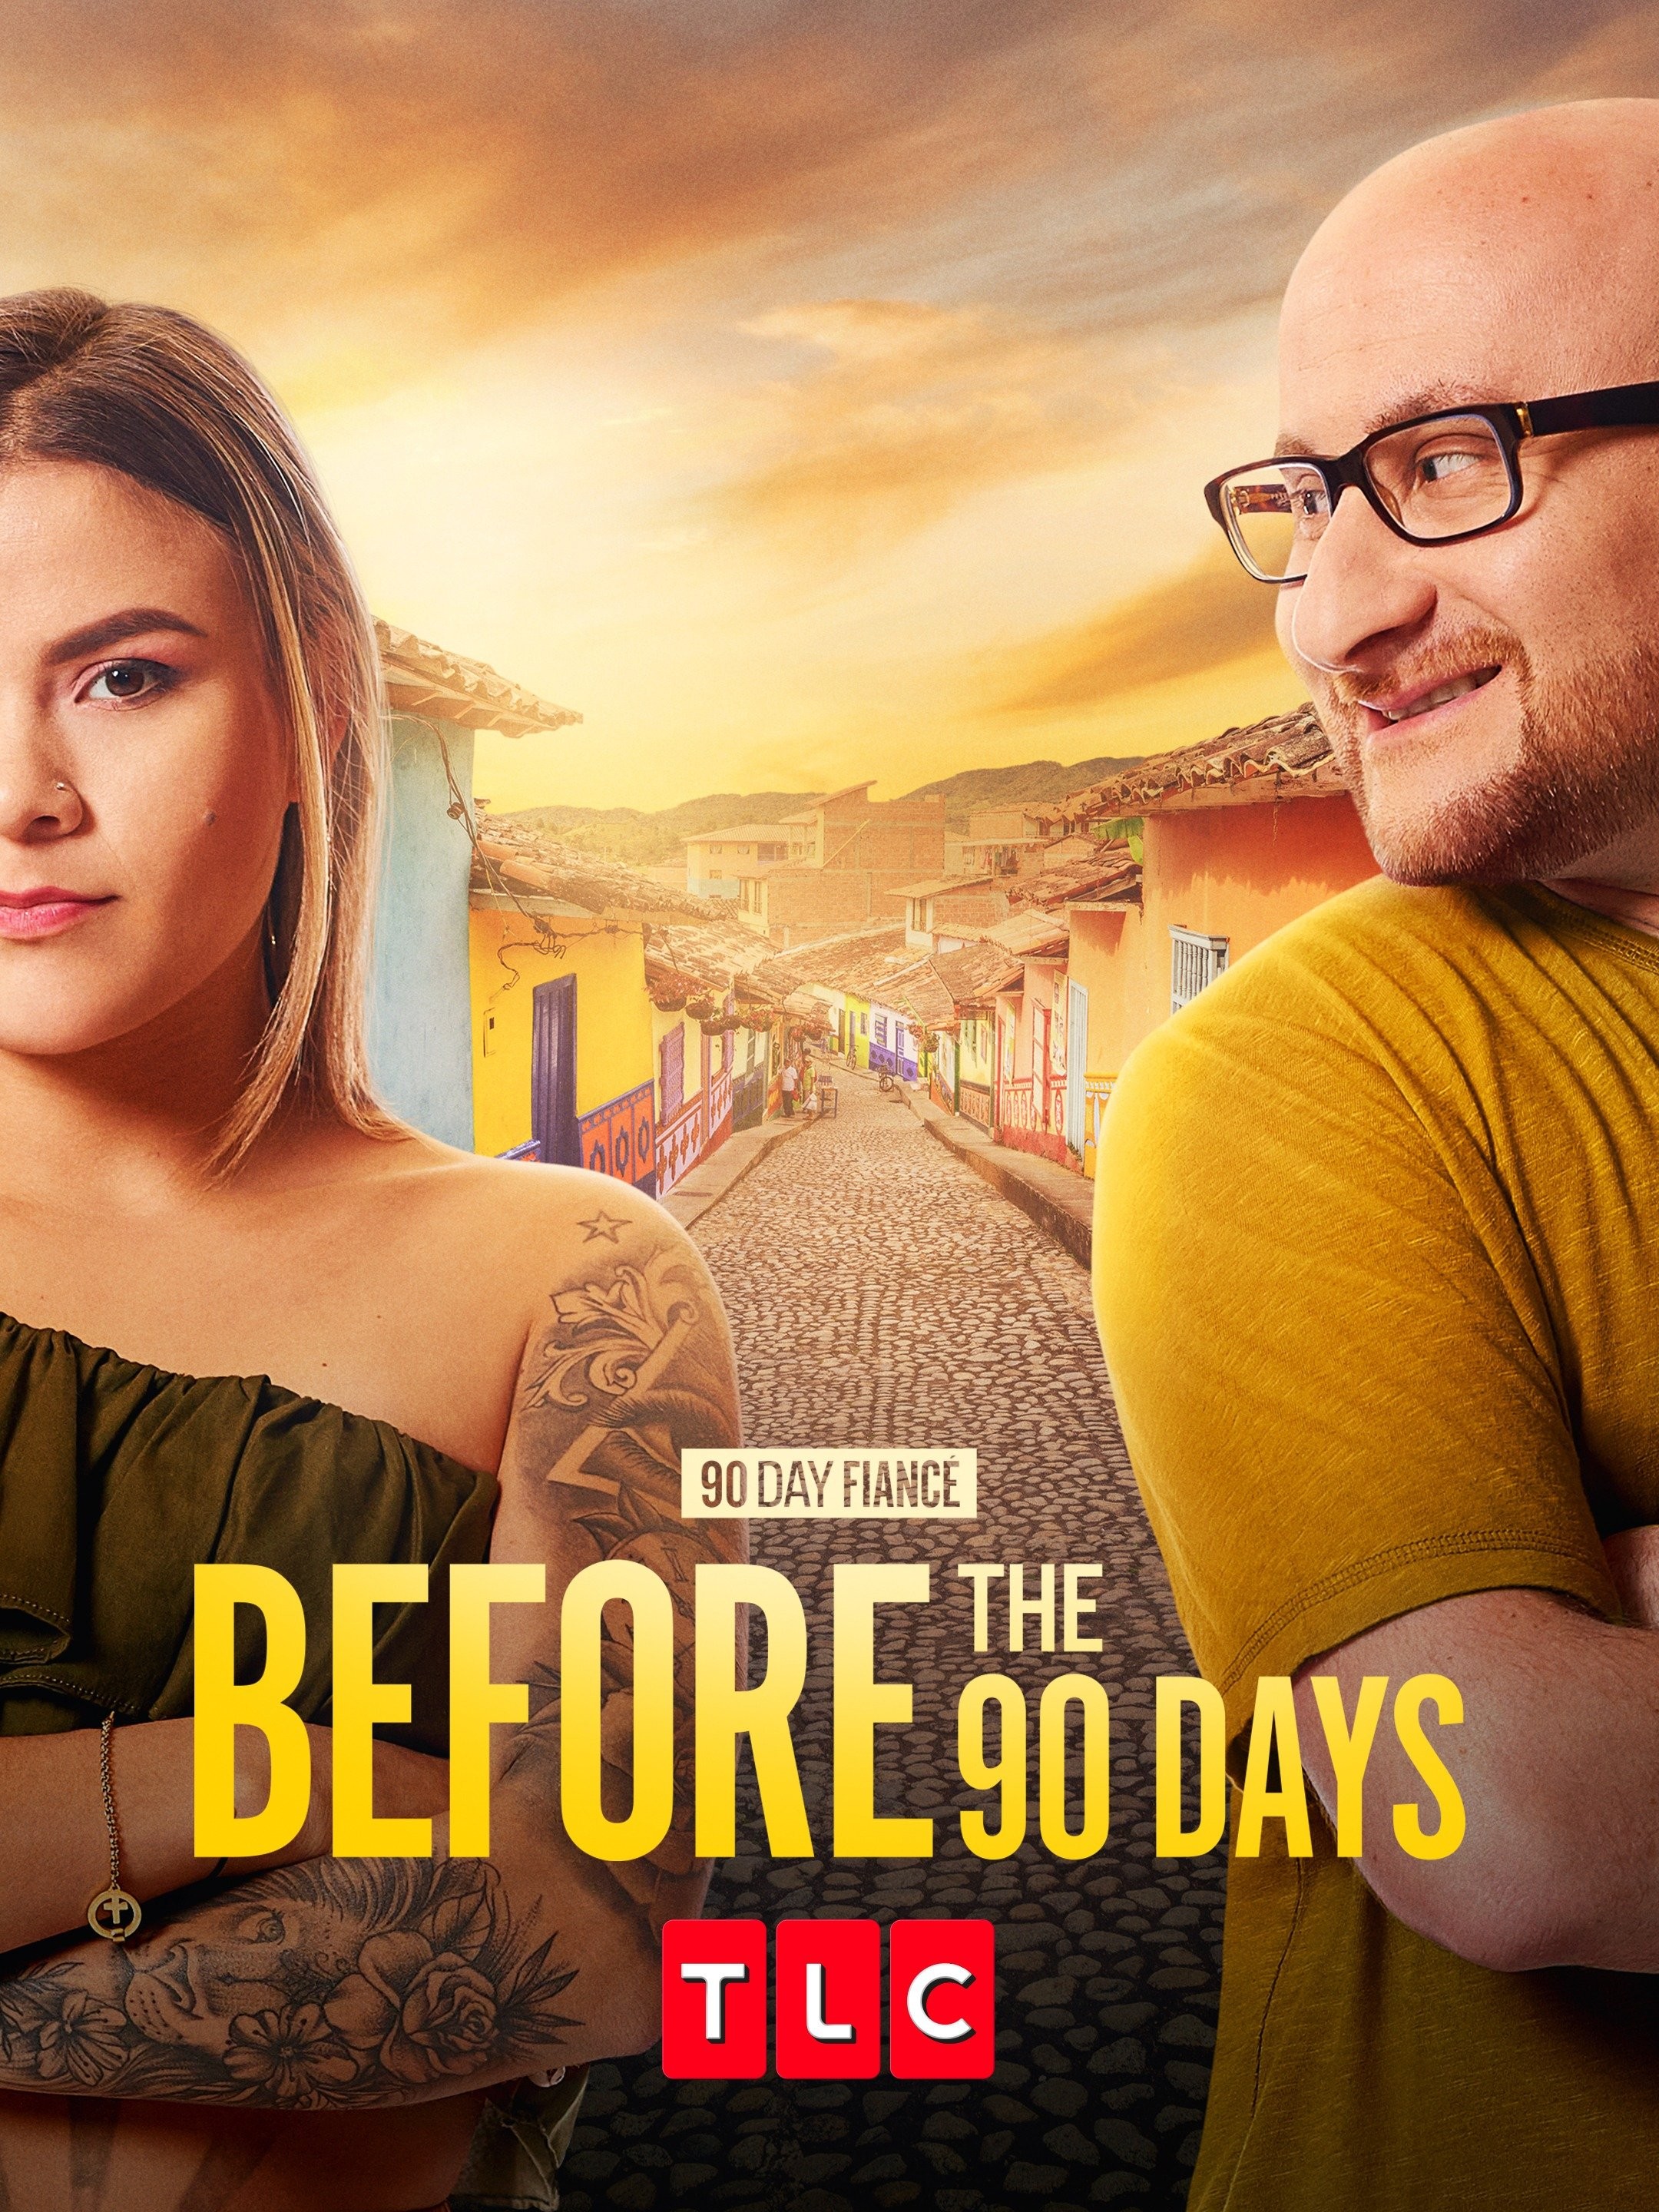 90 Day Fiancé: Before the 90 Days - TLC GO